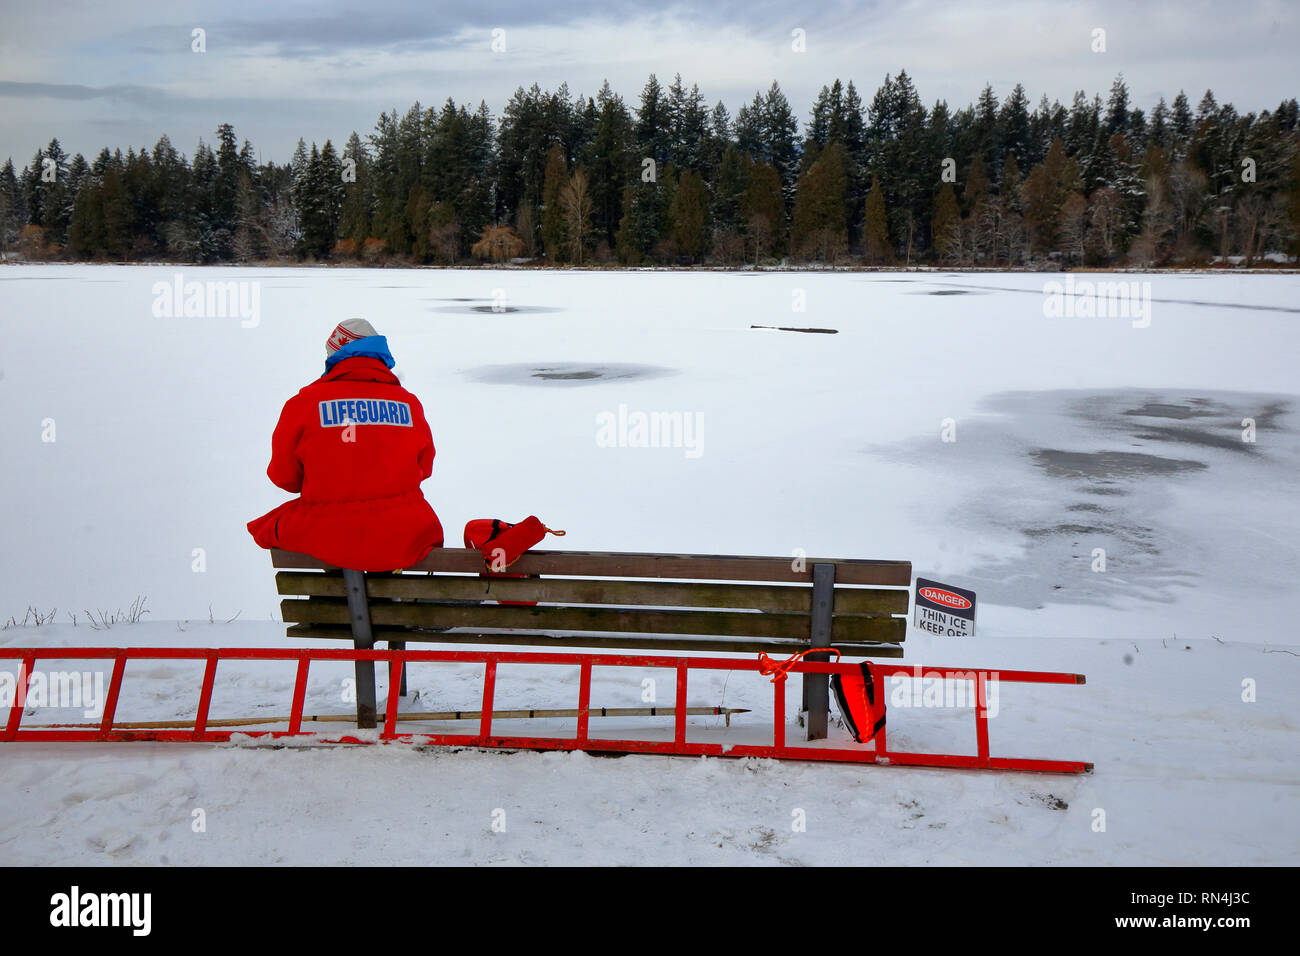 A lifeguard keeps watch for people who may ignore posted thin ice signs at Lost Lagoon in Stanley Park, Vancouver, British Columbia, February 17, 2019 Stock Photo